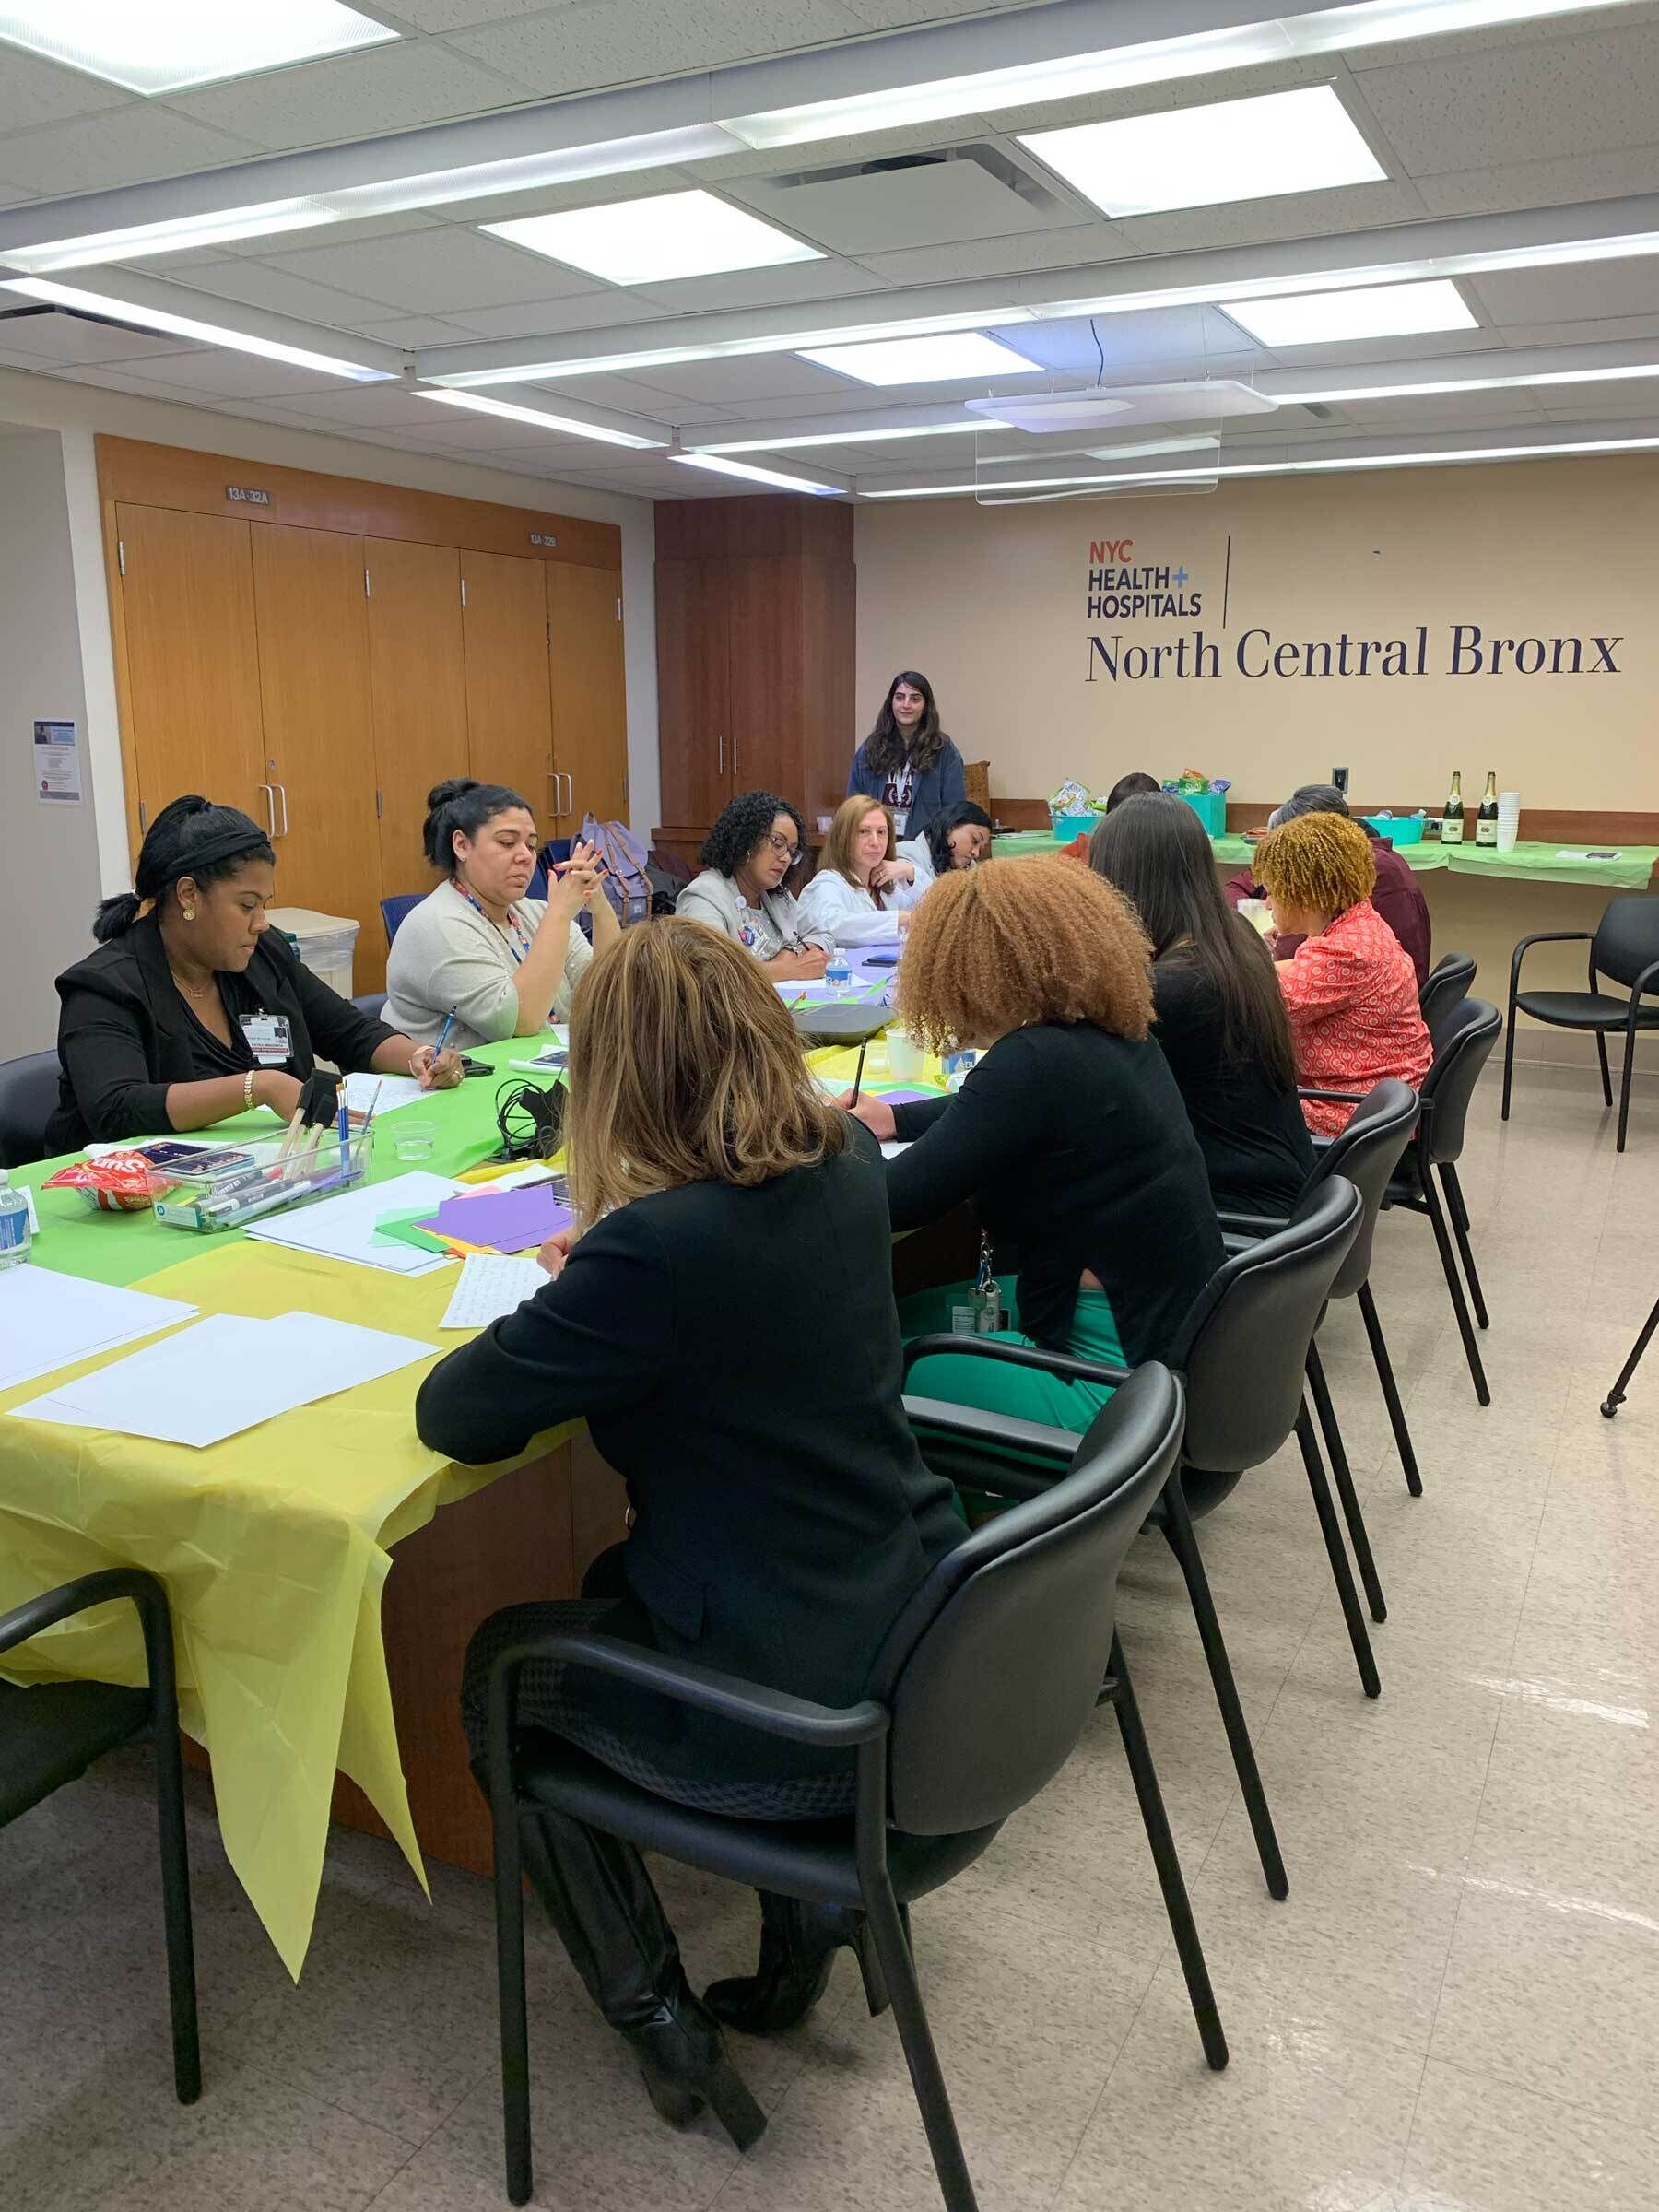 Group of professionals in an art session at North Central Bronx Hospital with papers and bottles on the table.